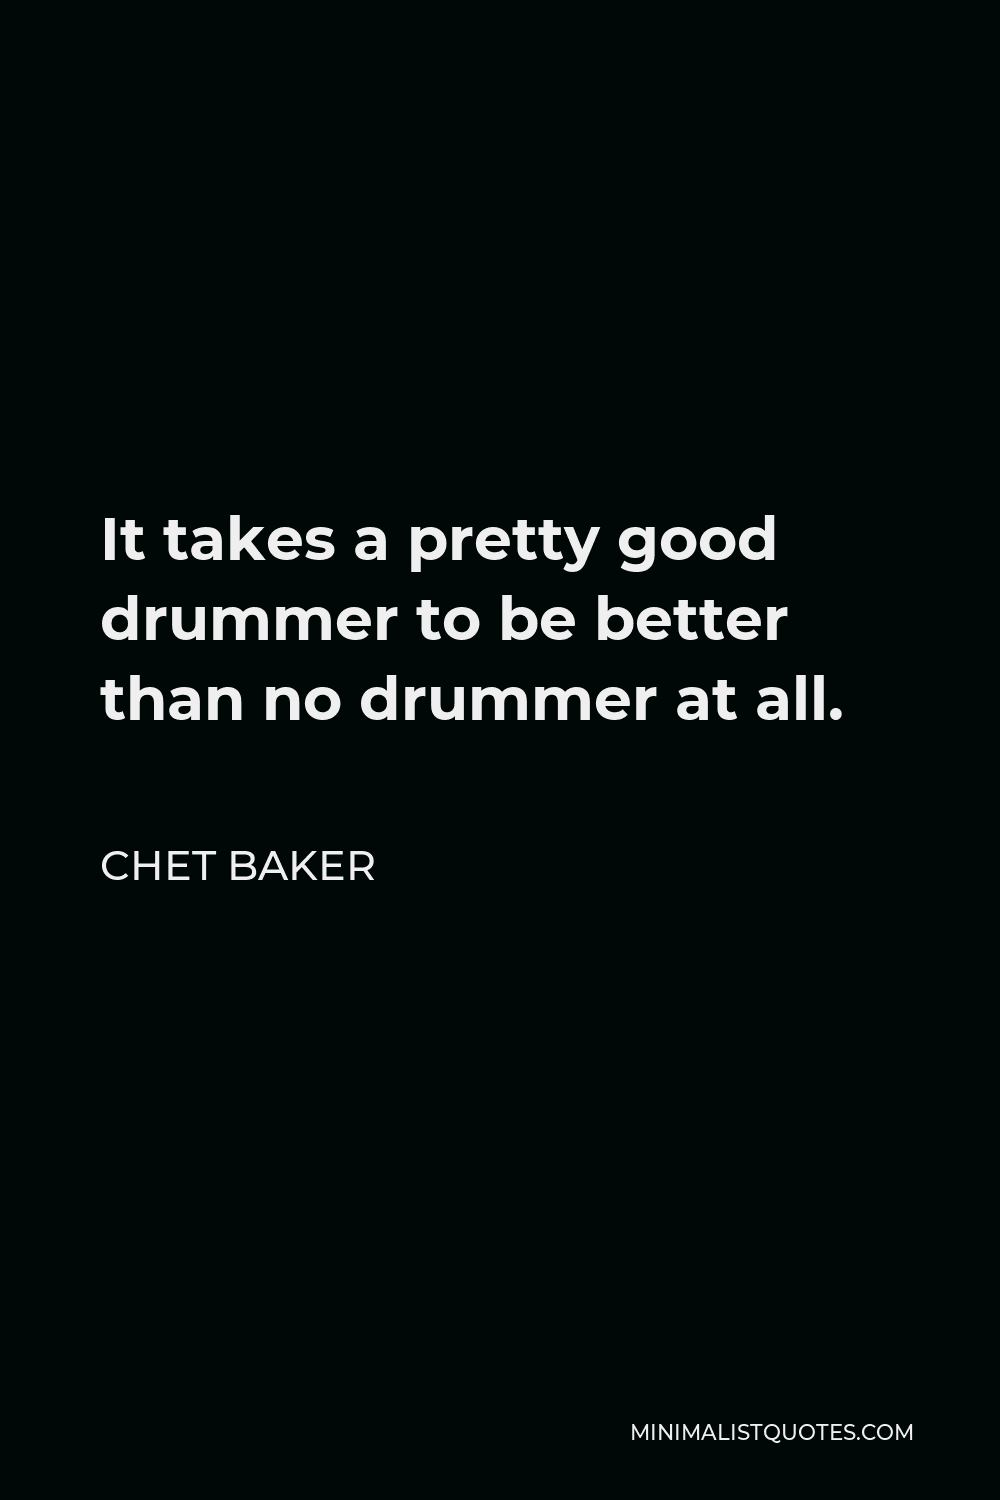 Chet Baker Quote - It takes a pretty good drummer to be better than no drummer at all.